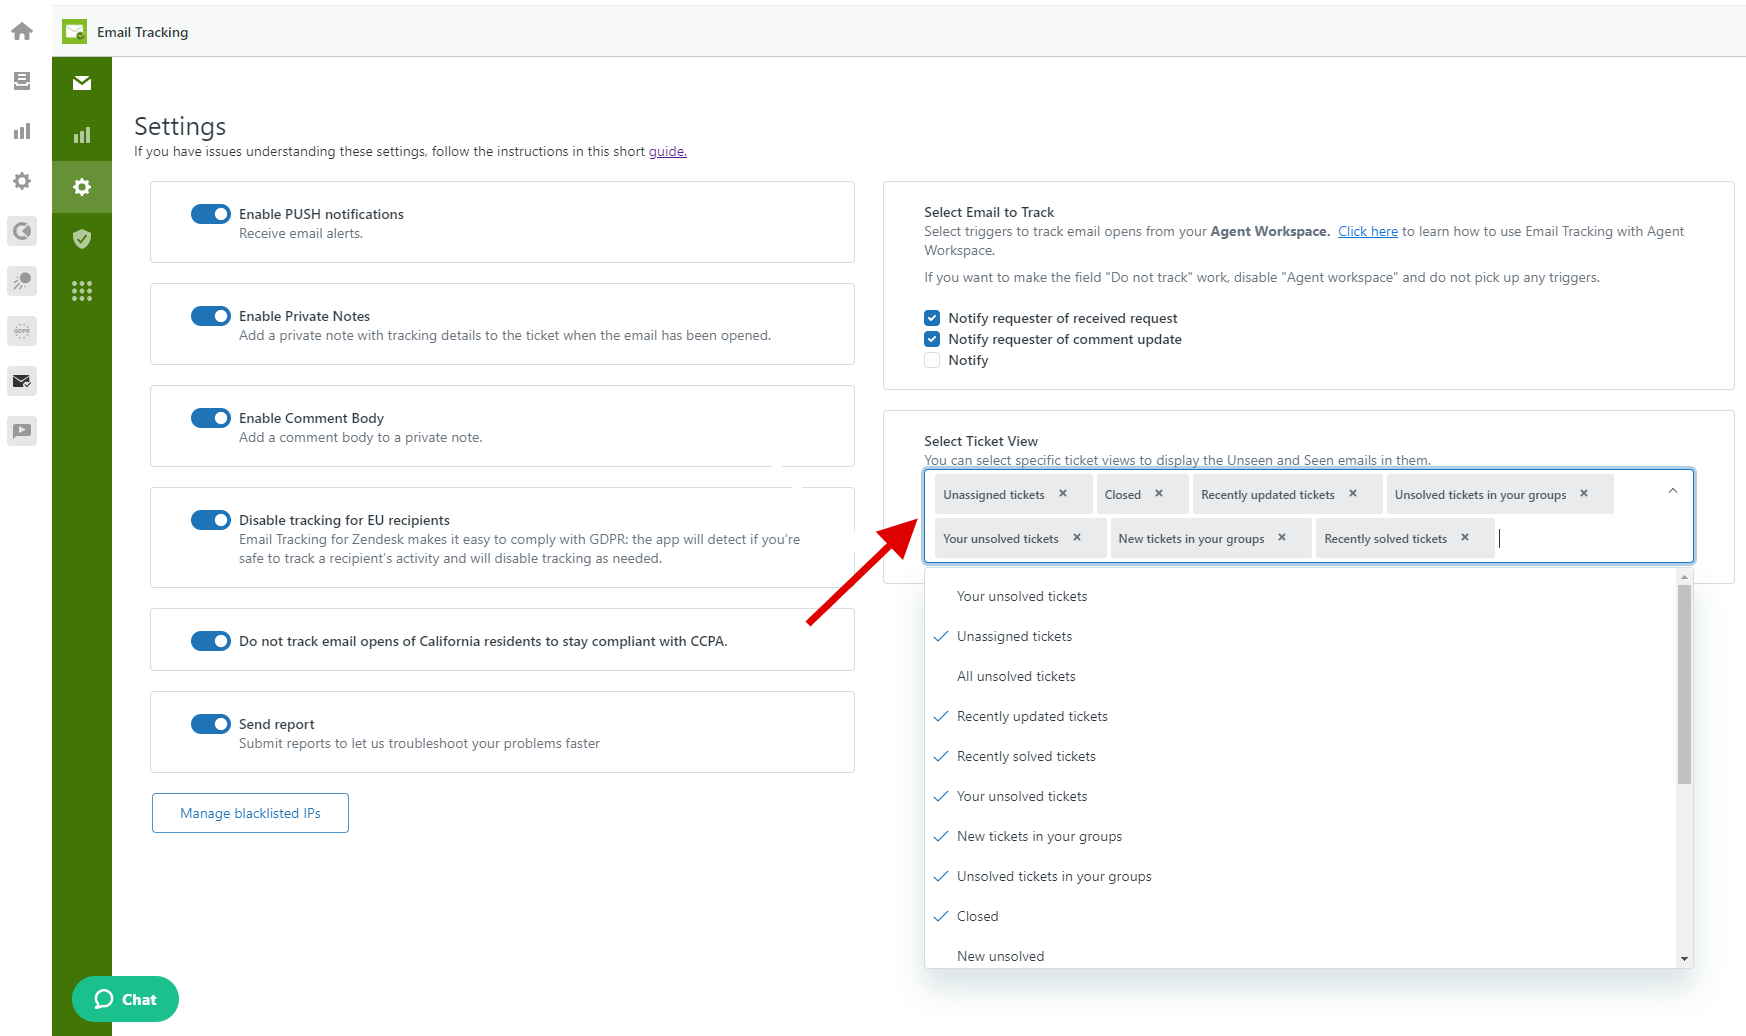 Ticket View In Email Tracking Settings